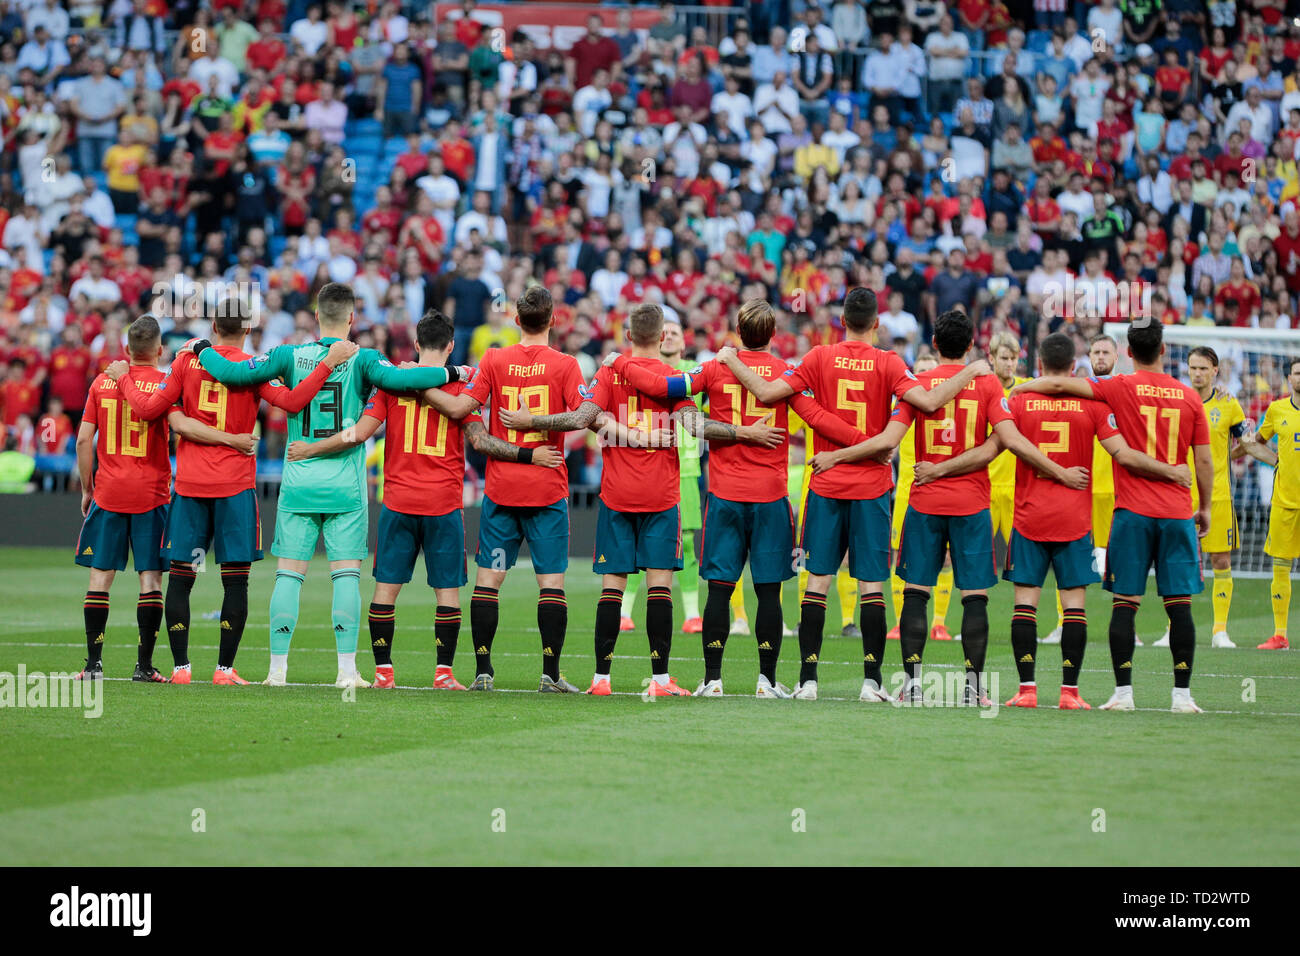 Spain National Team Seen During The Uefa Euro 2020 Qualifier Match Between Spain And Sweden At Santiago Bernabeu Stadium In Madrid Final Score Spain 3 Sweden 0 Stock Photo Alamy